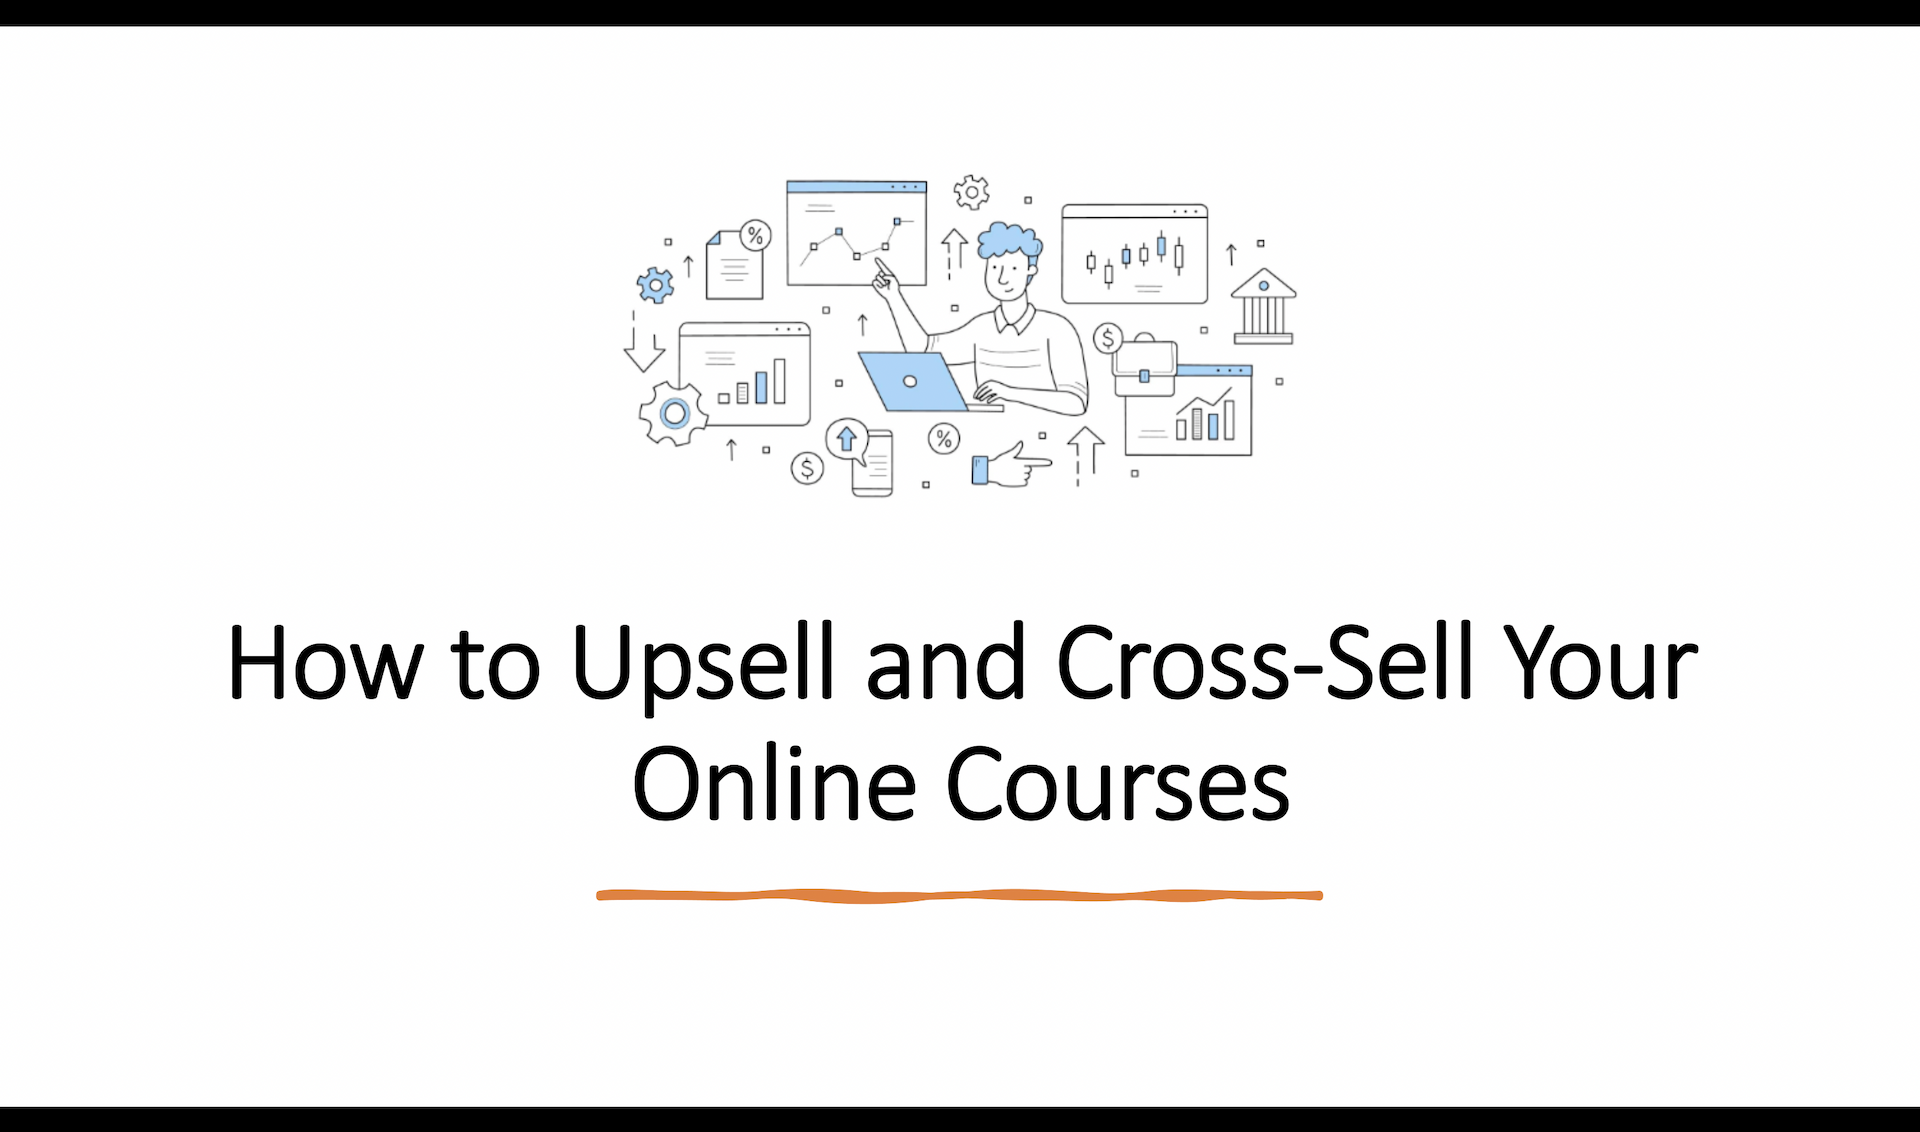 How to Upsell and Cross-Sell Your Online Courses?